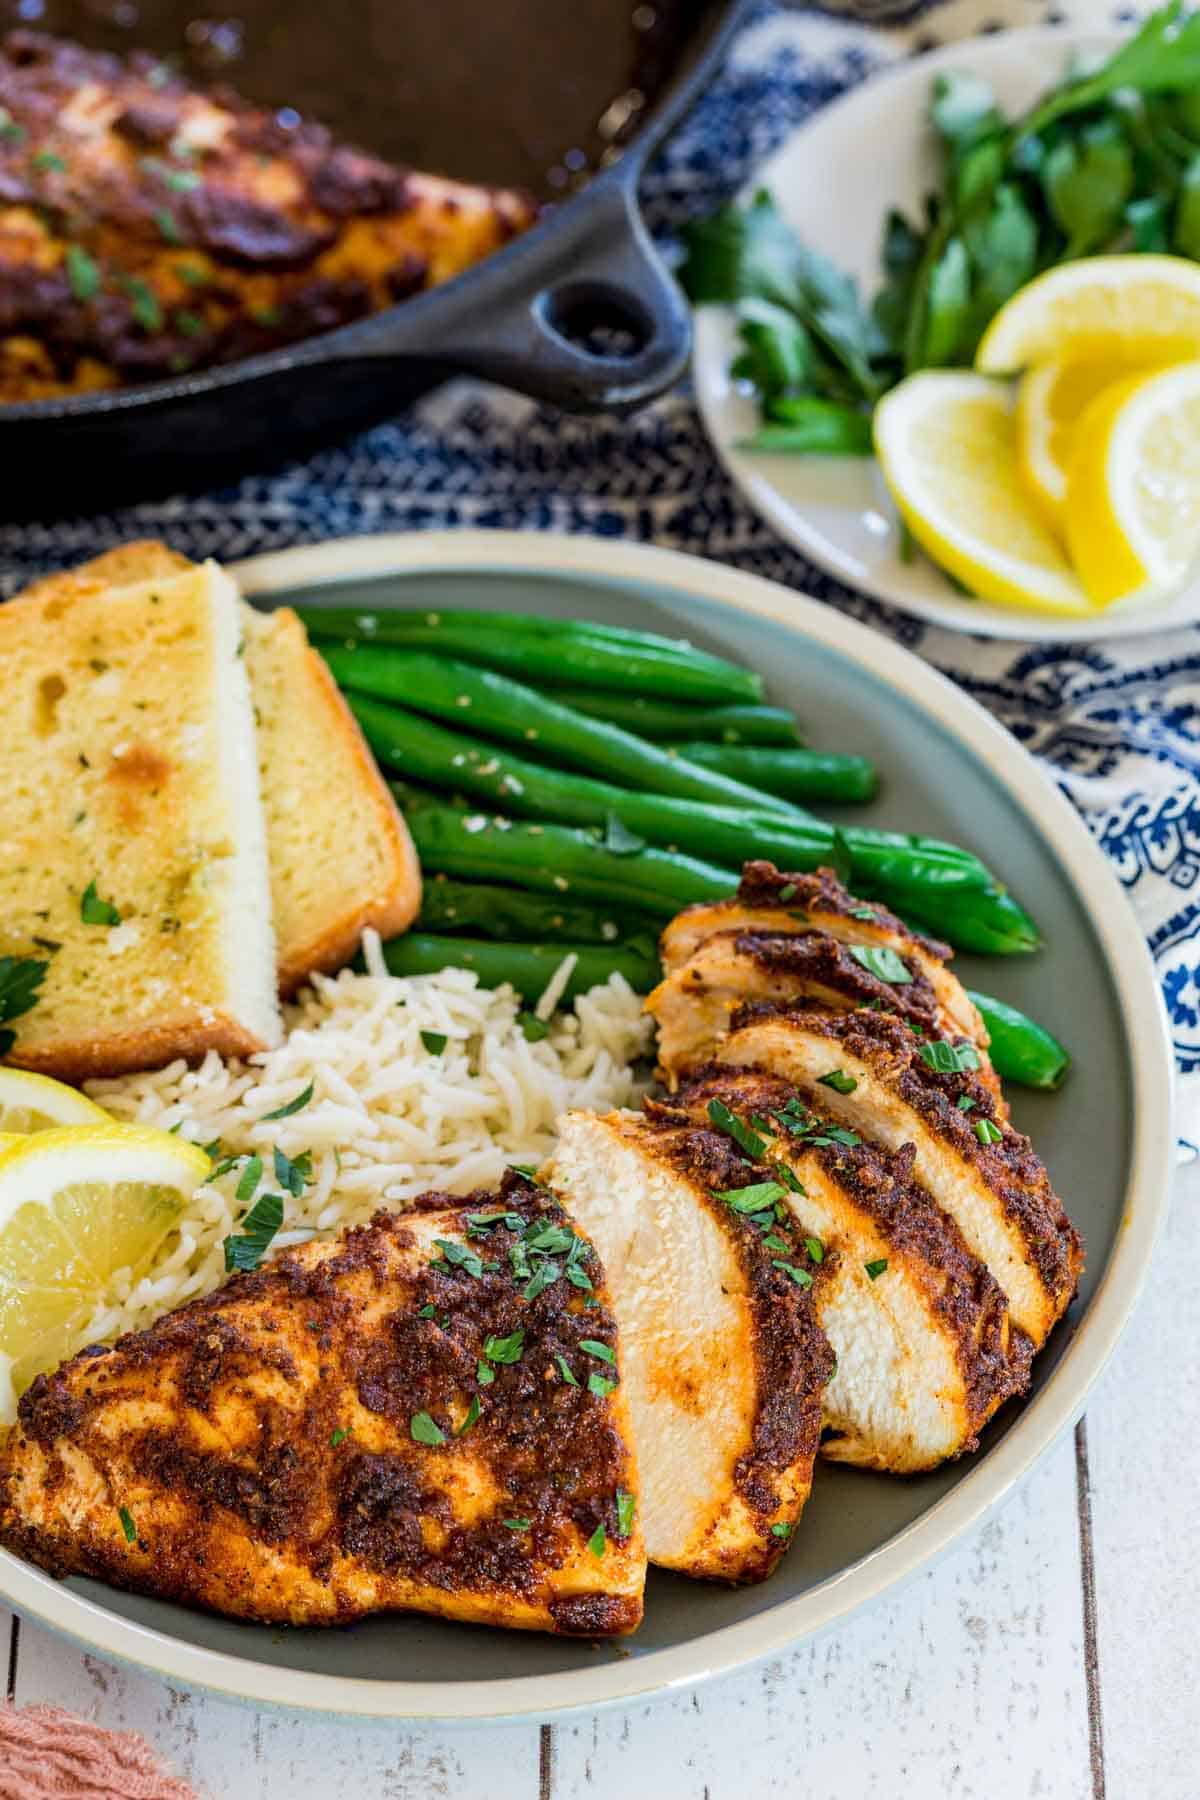 Juicy blackened chicken slices on a plate with green beans, rice, and toast slices.